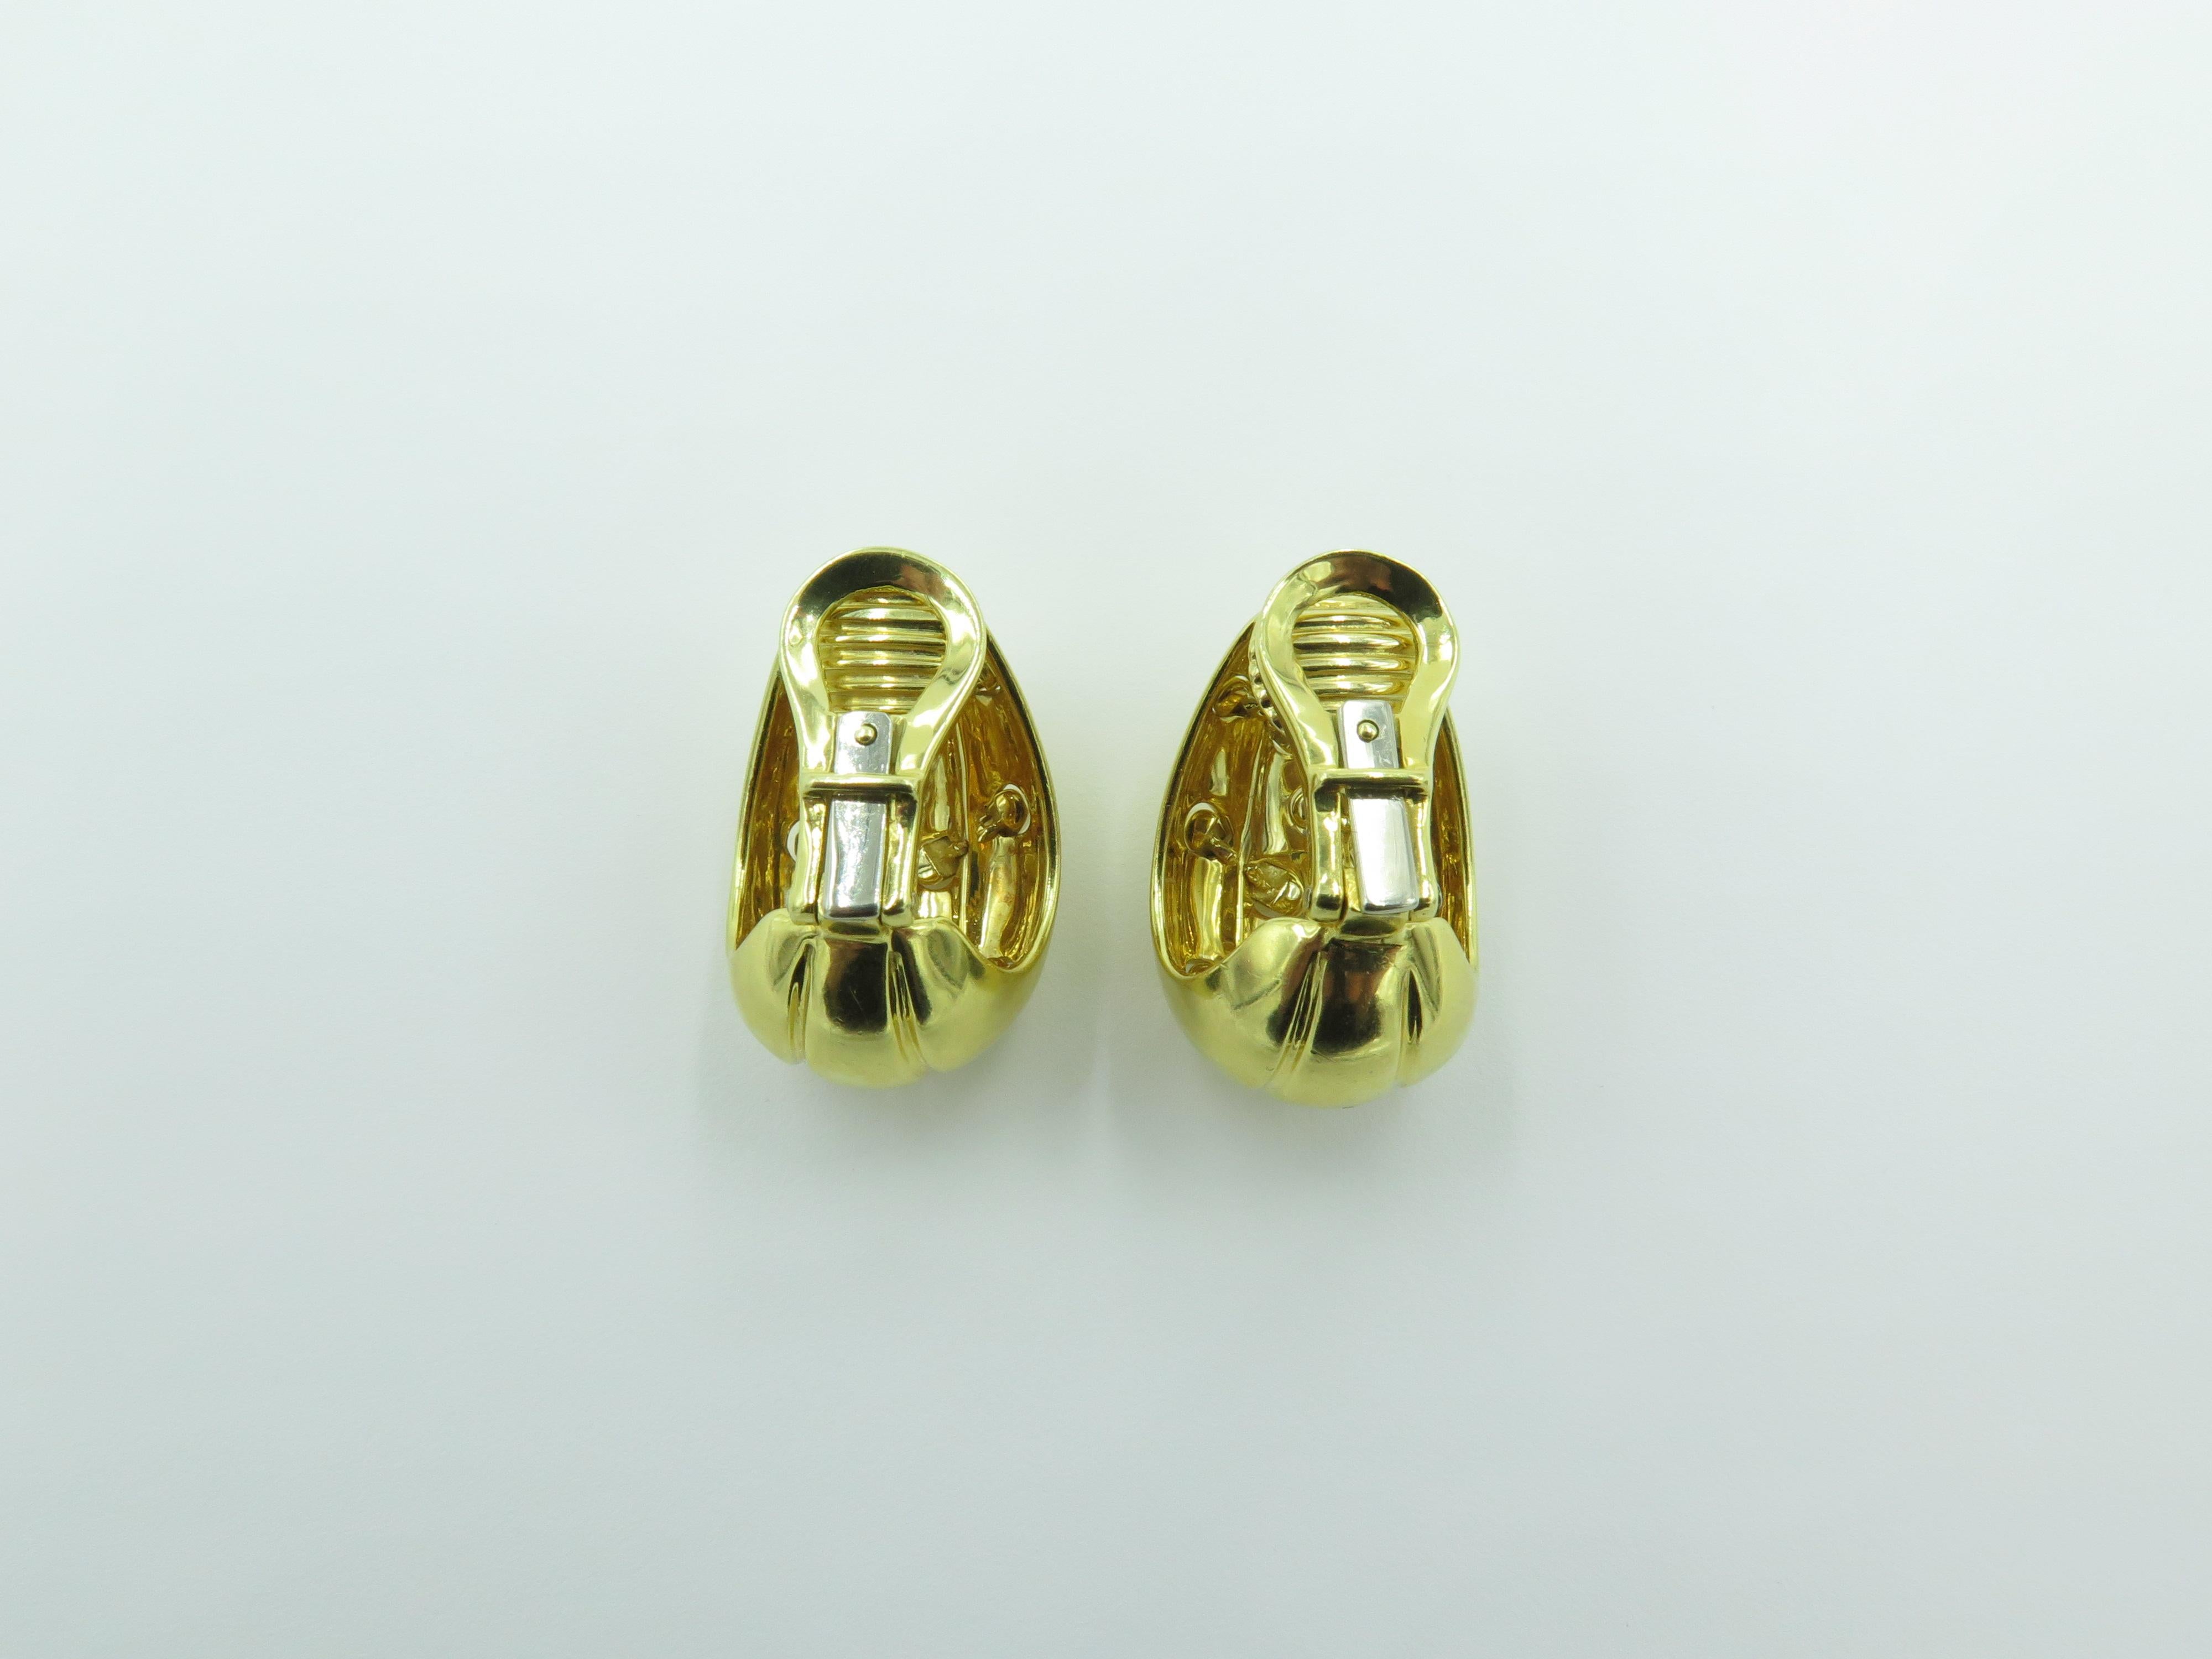 A pair of 18 karat yellow gold earrings. Tiffany & Co. Designed as polished gold half hoops, enhanced by a cross stitch pattern. Length is approximately 1 inch. Gross weight is approximately 22.1 grams.